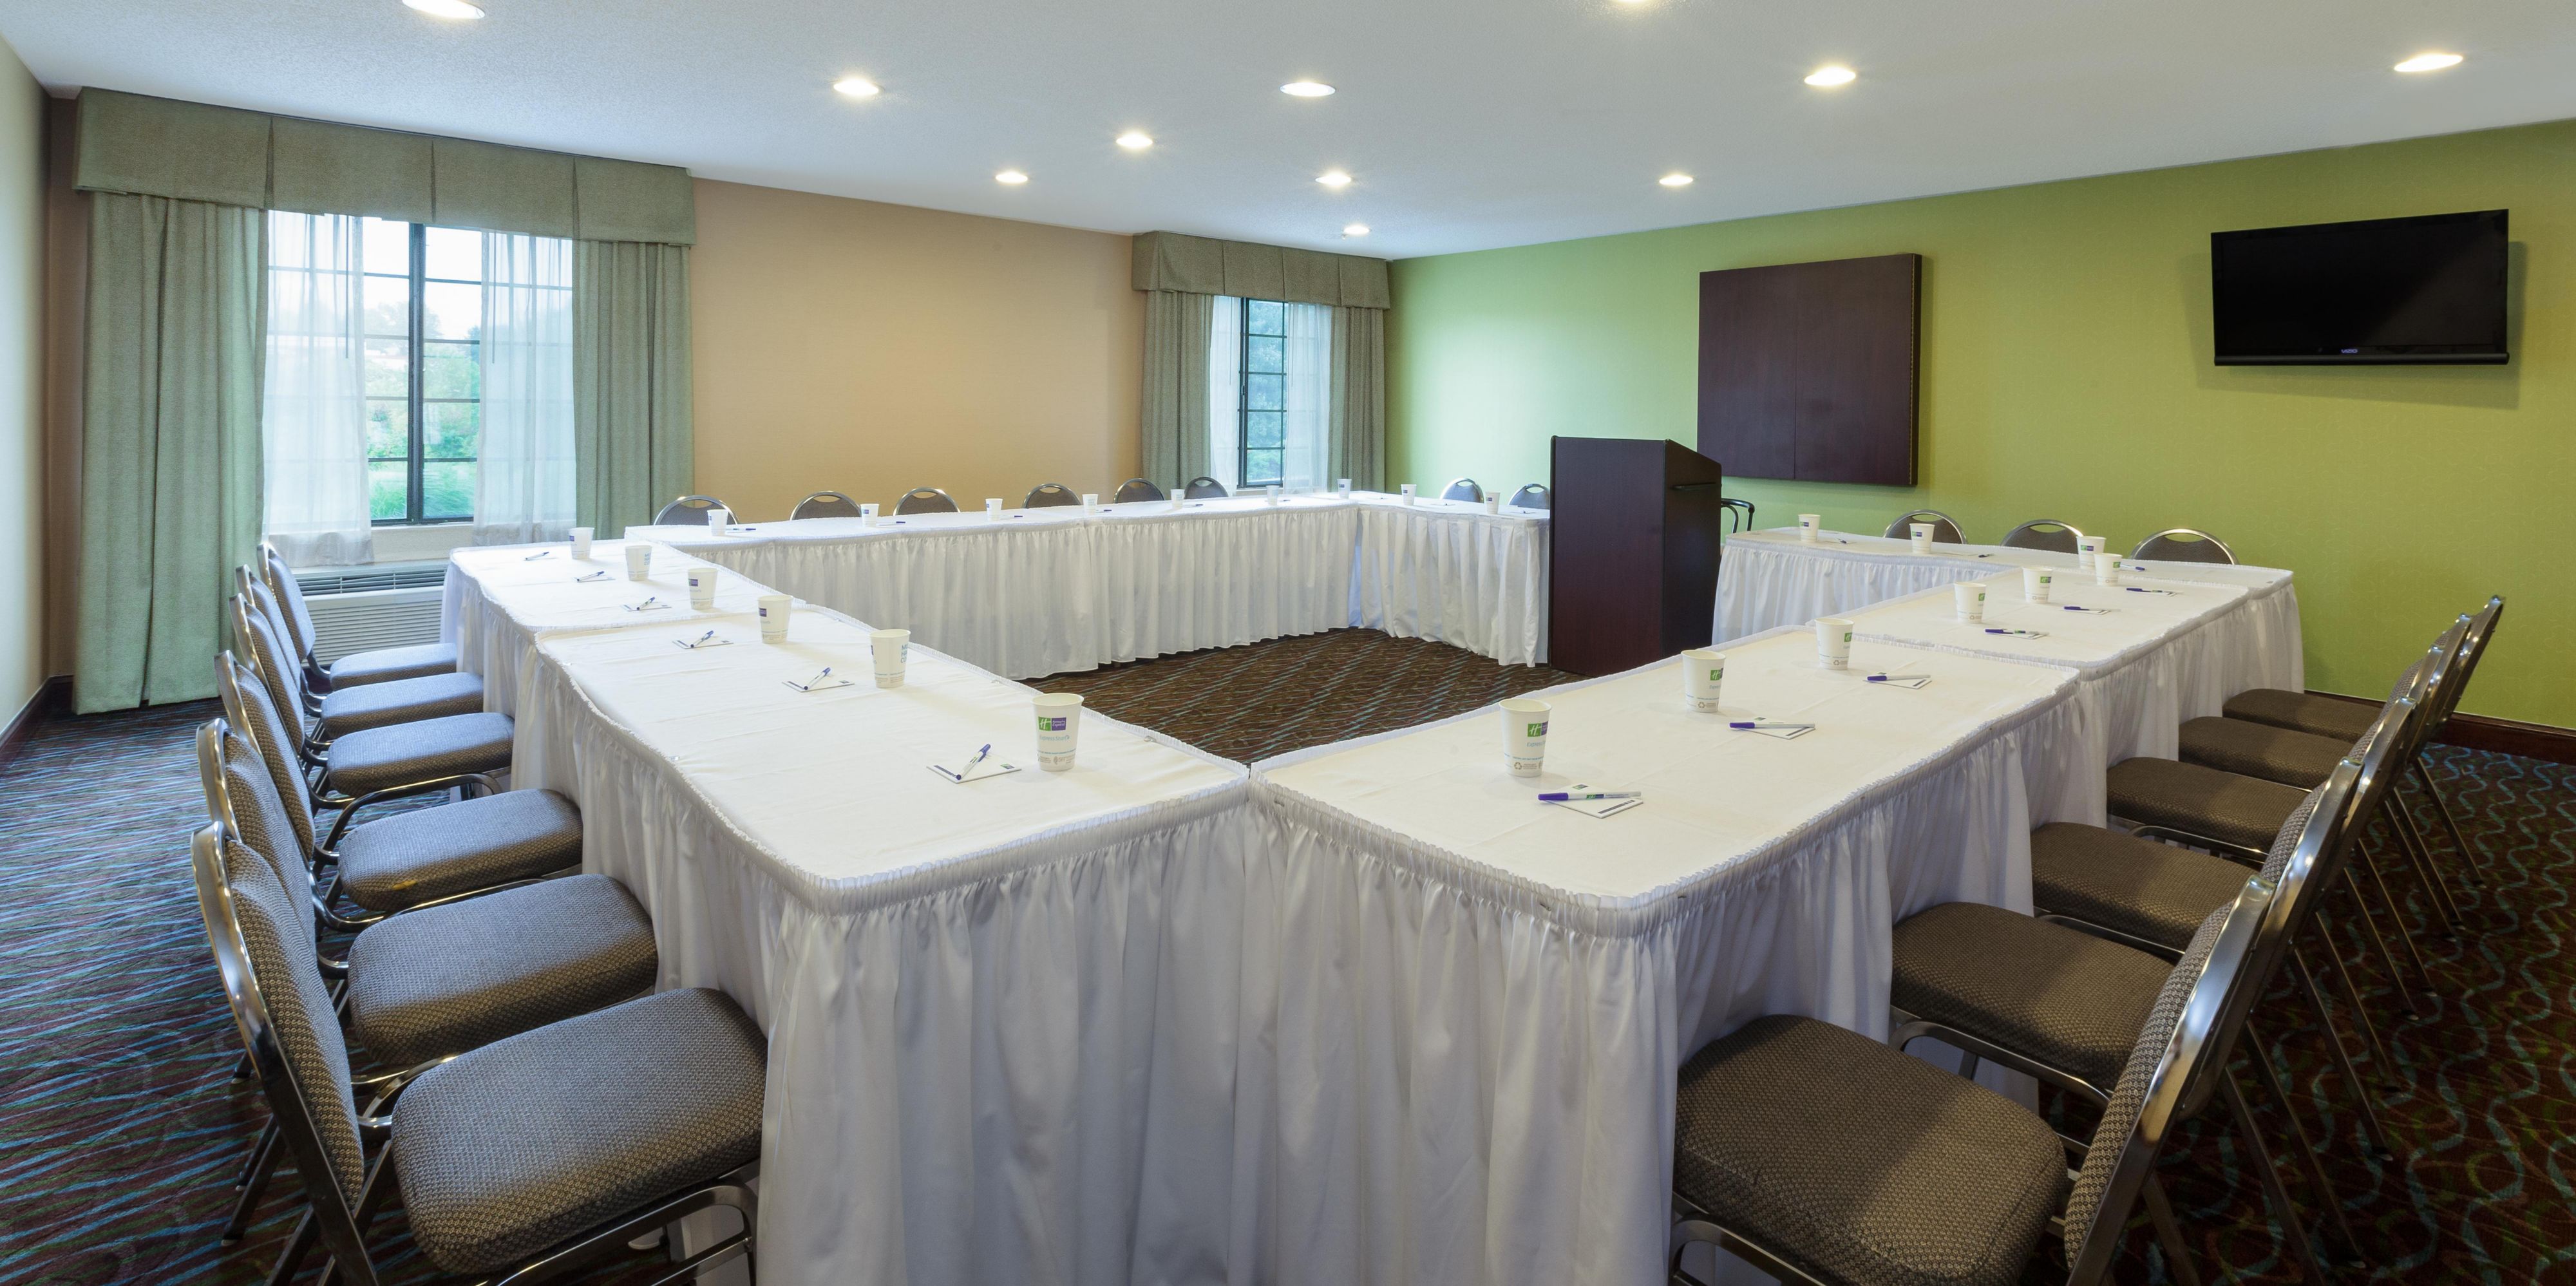 When you are ready to plan your next meeting or group event, you can book with confidence with our new flexible meeting offer. We're committed to high levels of cleanliness. That means clean, clutter-free event space and an experience that supports the well-being of your attendees with flexible re-scheduling or cancellation, if needed.